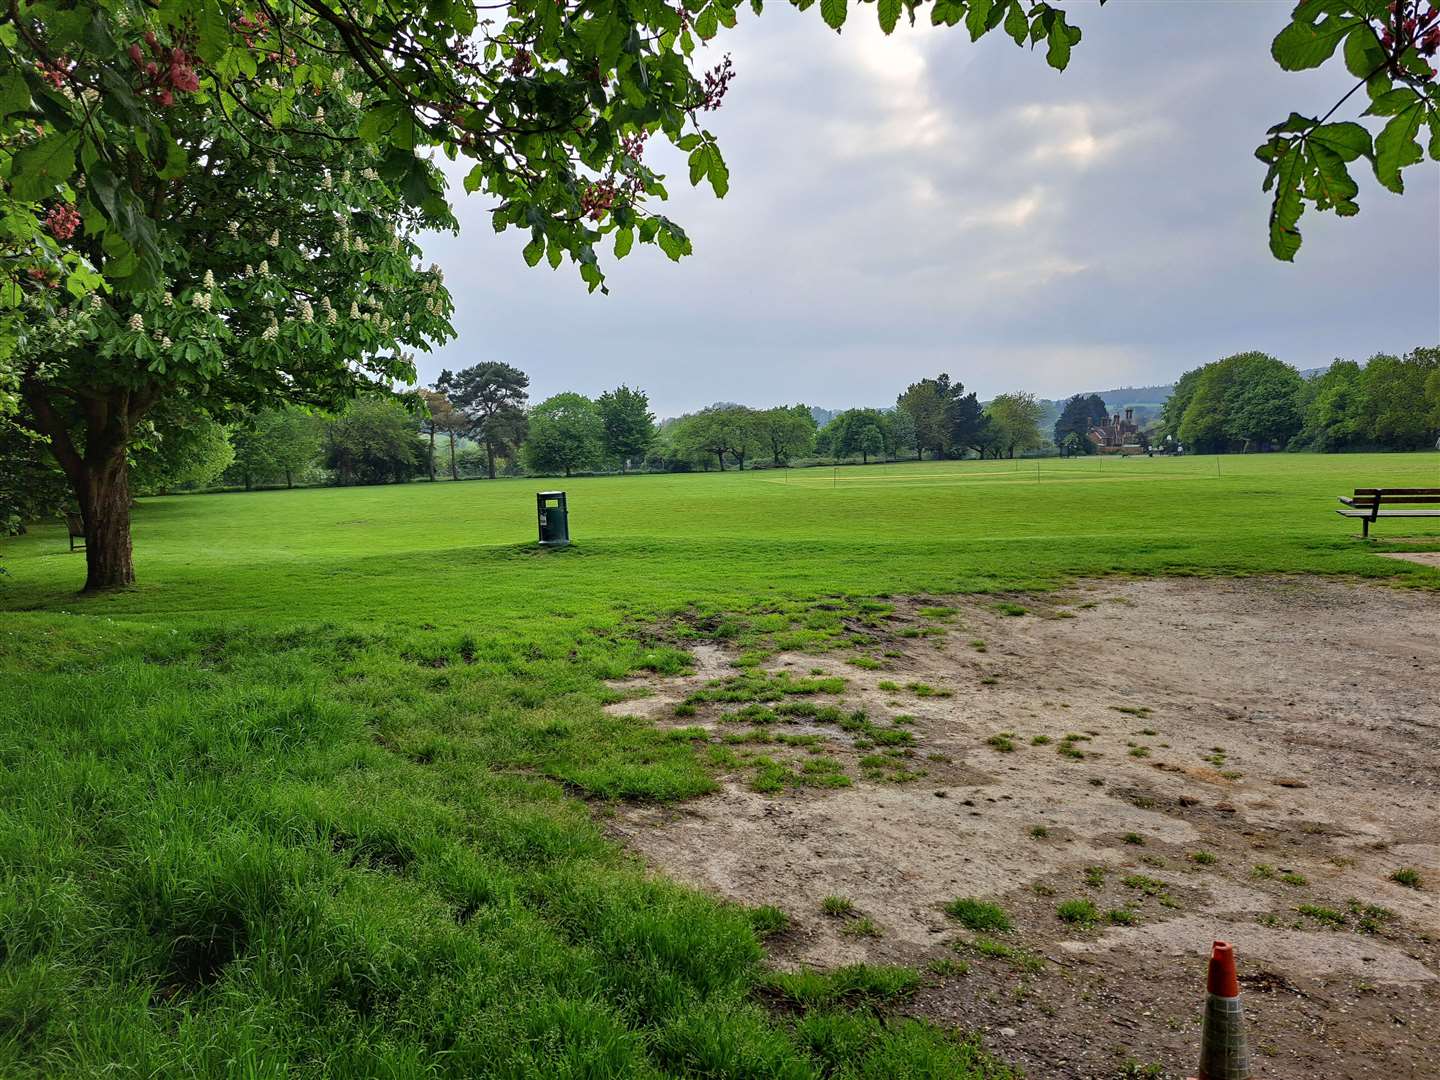 The land lies adjacent to the Wateringbury playing fields